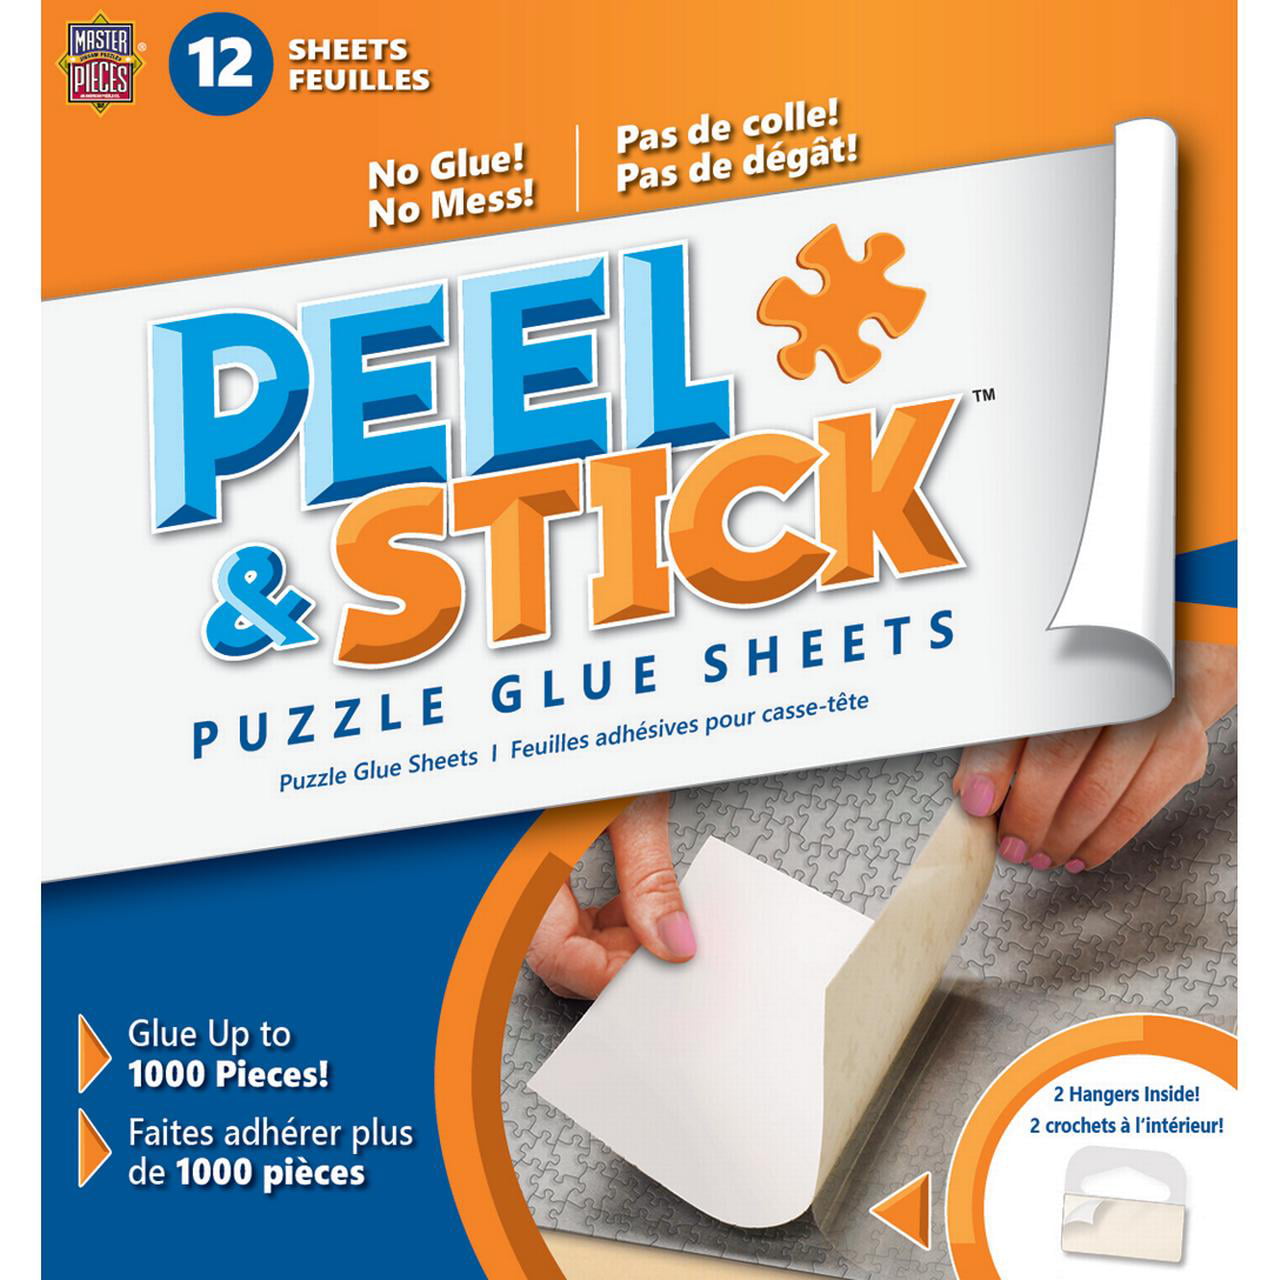 Details about   Adhesive Smart Puzzle Glue Sheets 8 Sheets per Pack